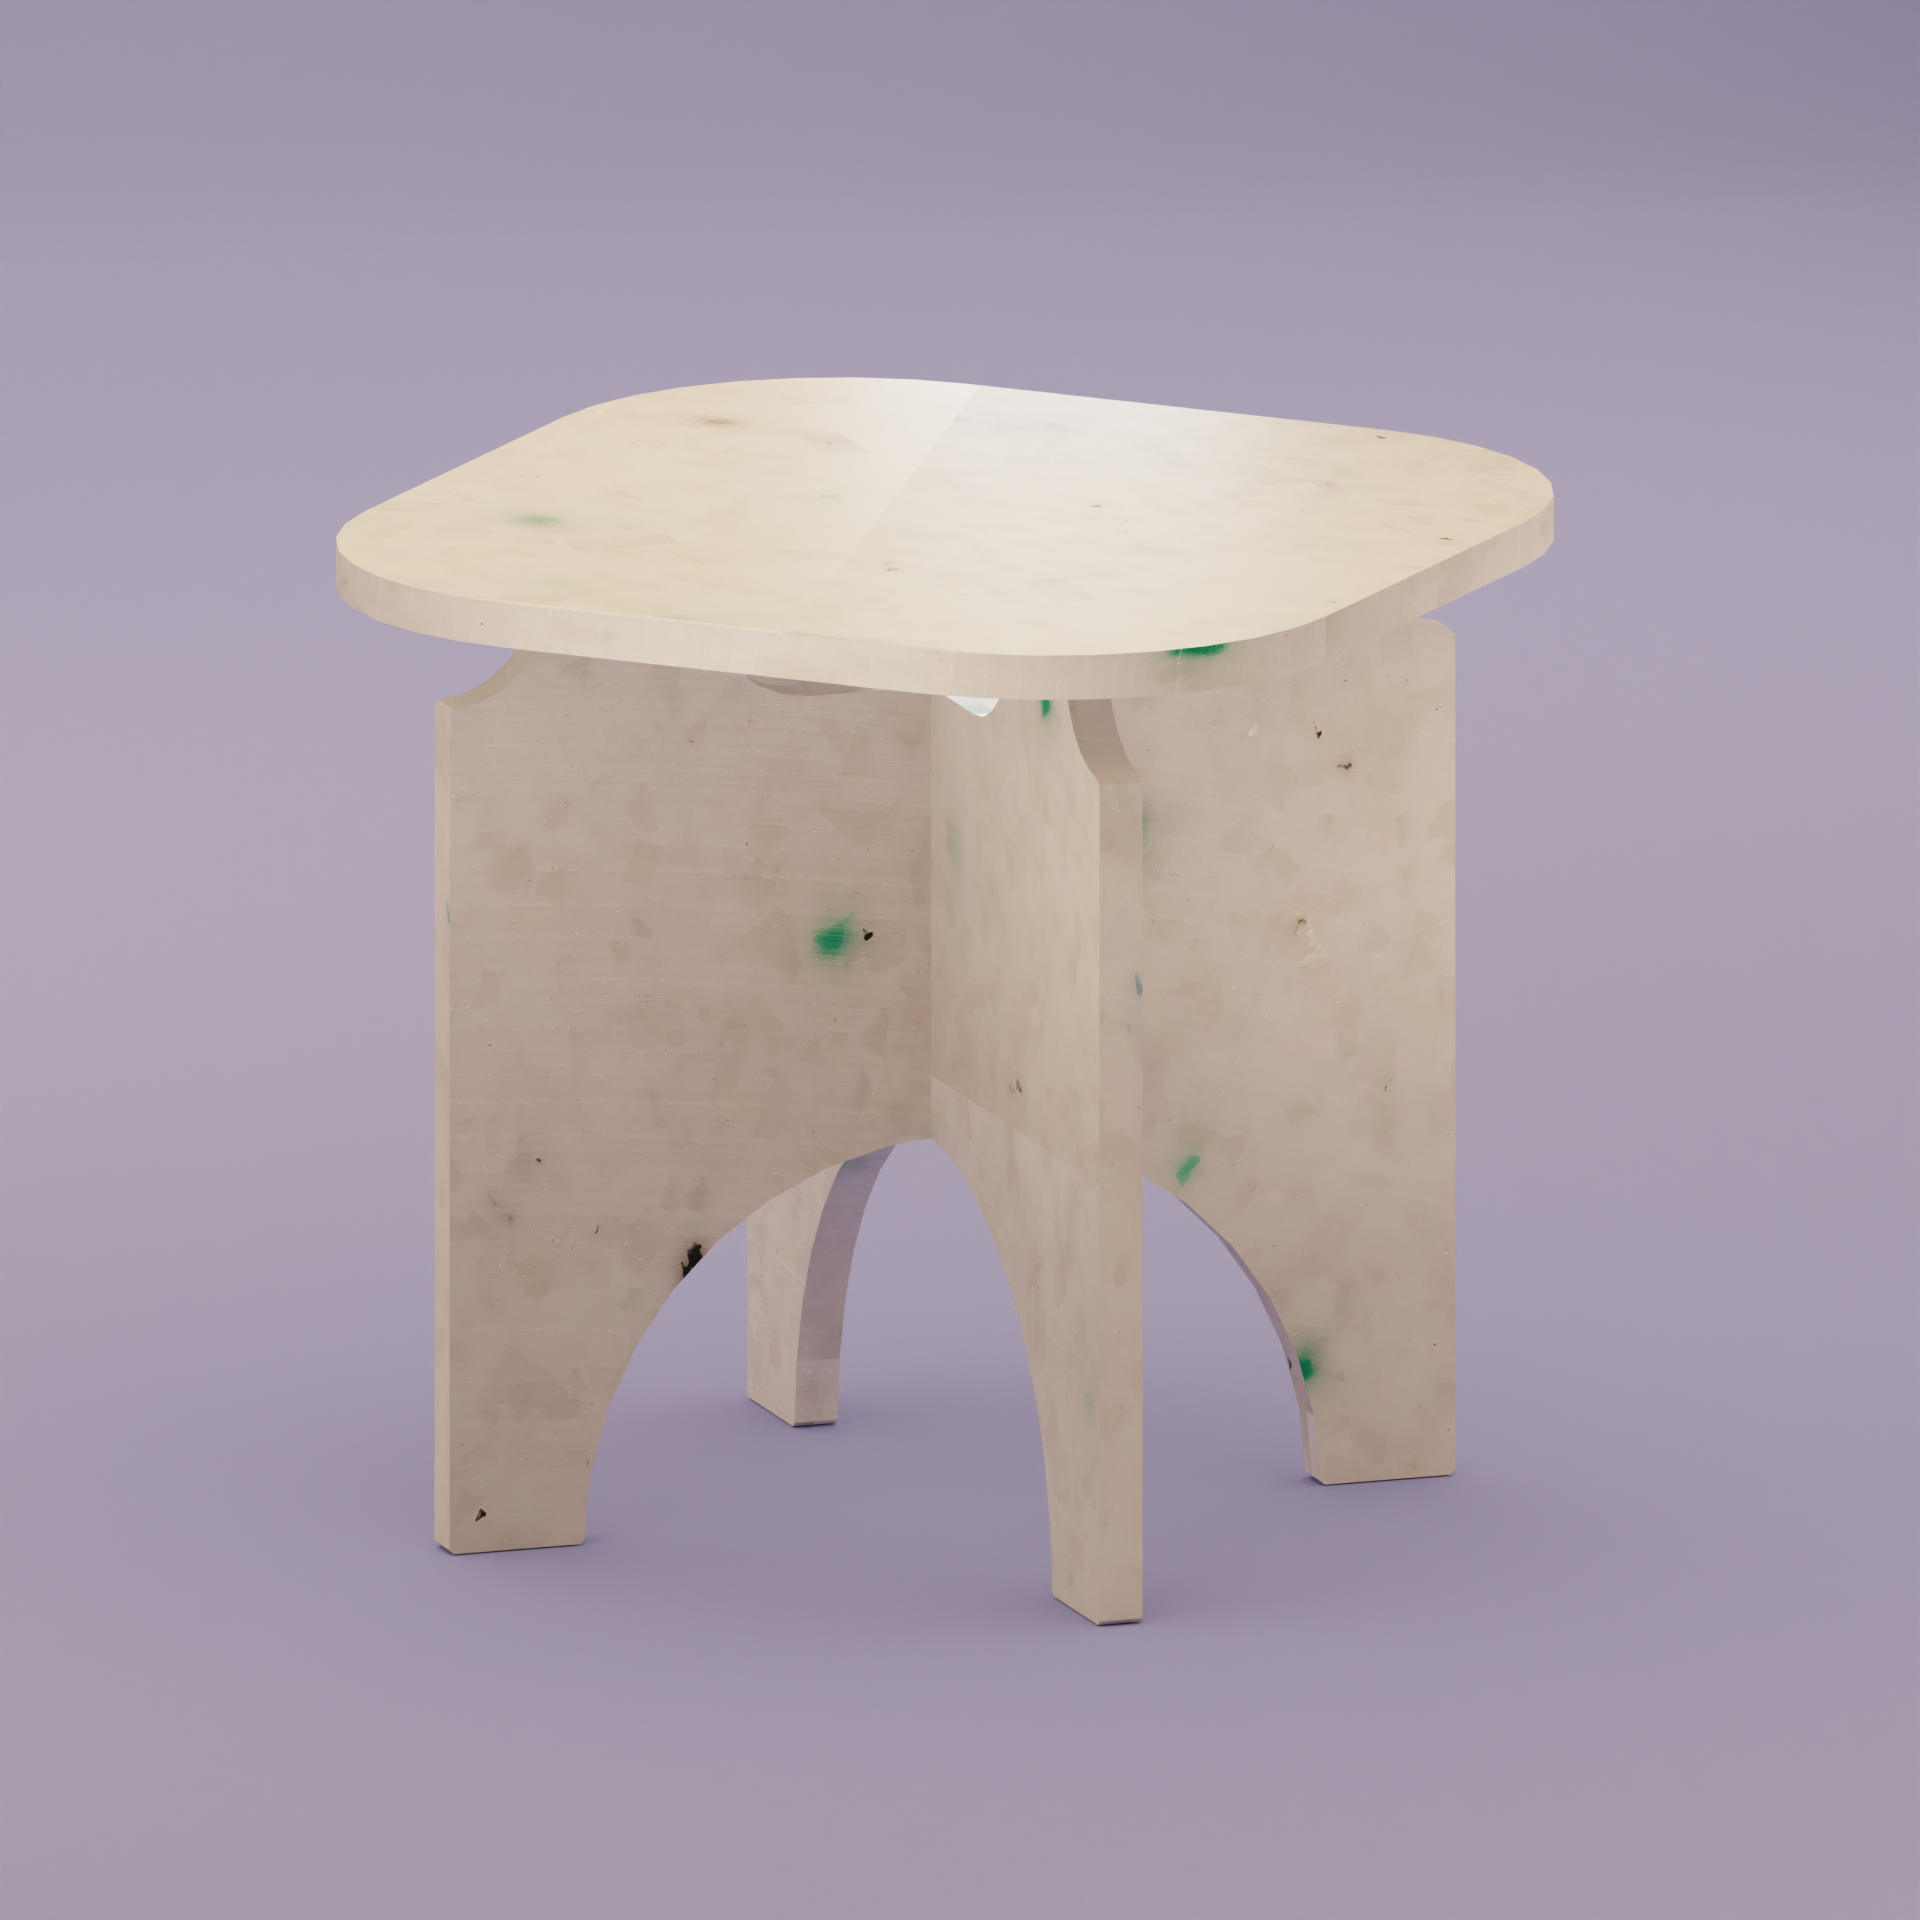 WHITE SQUARE TOP STOOL BY THE MINIMONO PROJECT - BRAND FOR ECO FRIENDLY - PLAYFUL - MULTI FUNCTIONAL - SUSTAINABLE - HIGH QUALITY - DESIGN FURNITURE FROM RECYCLED PLASTIC FOR BOTH ADULT AND CHILDREN MADE IN BERLIN GERMANY